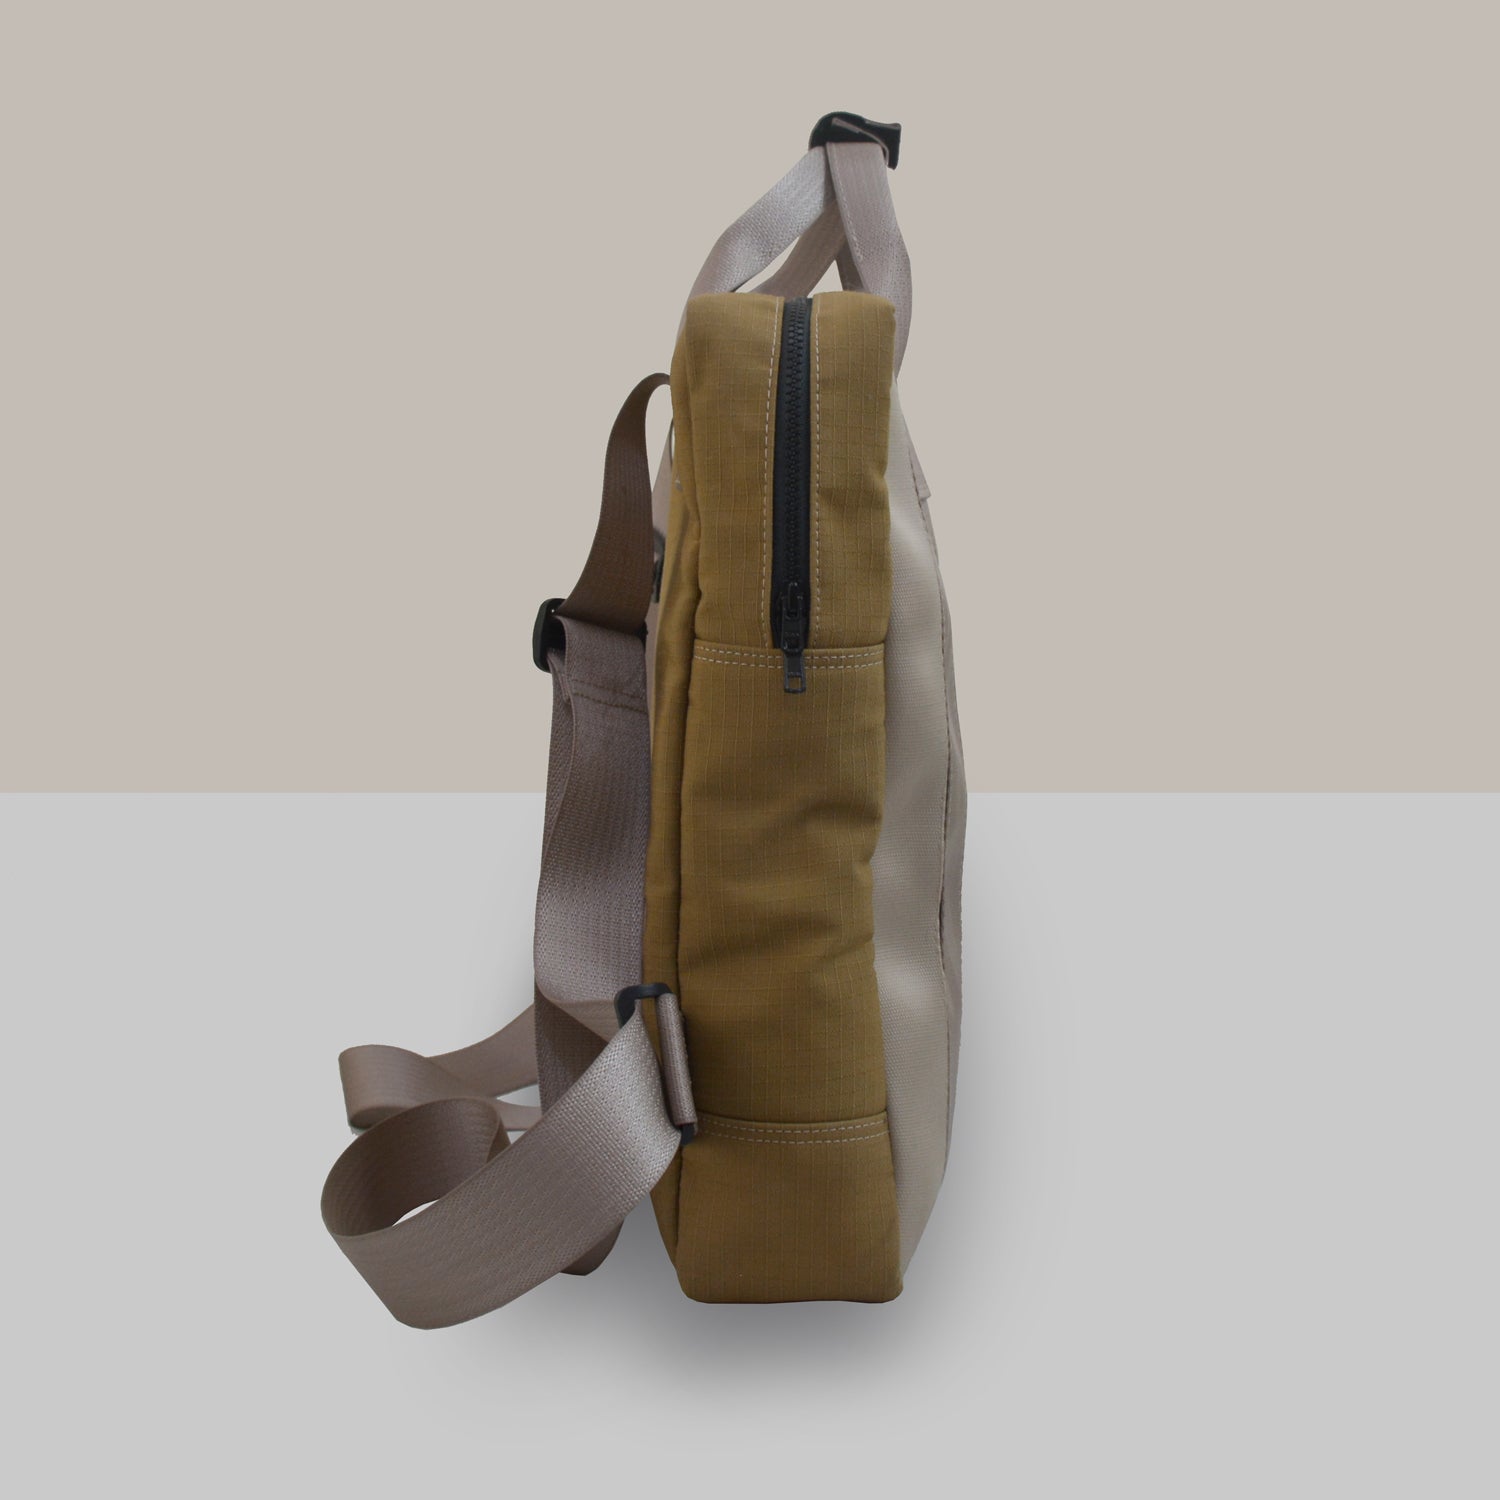 Arrive Upcycled Backpack in Beige Car Seat Belts and Khaki Canvas [15"laptop bag]